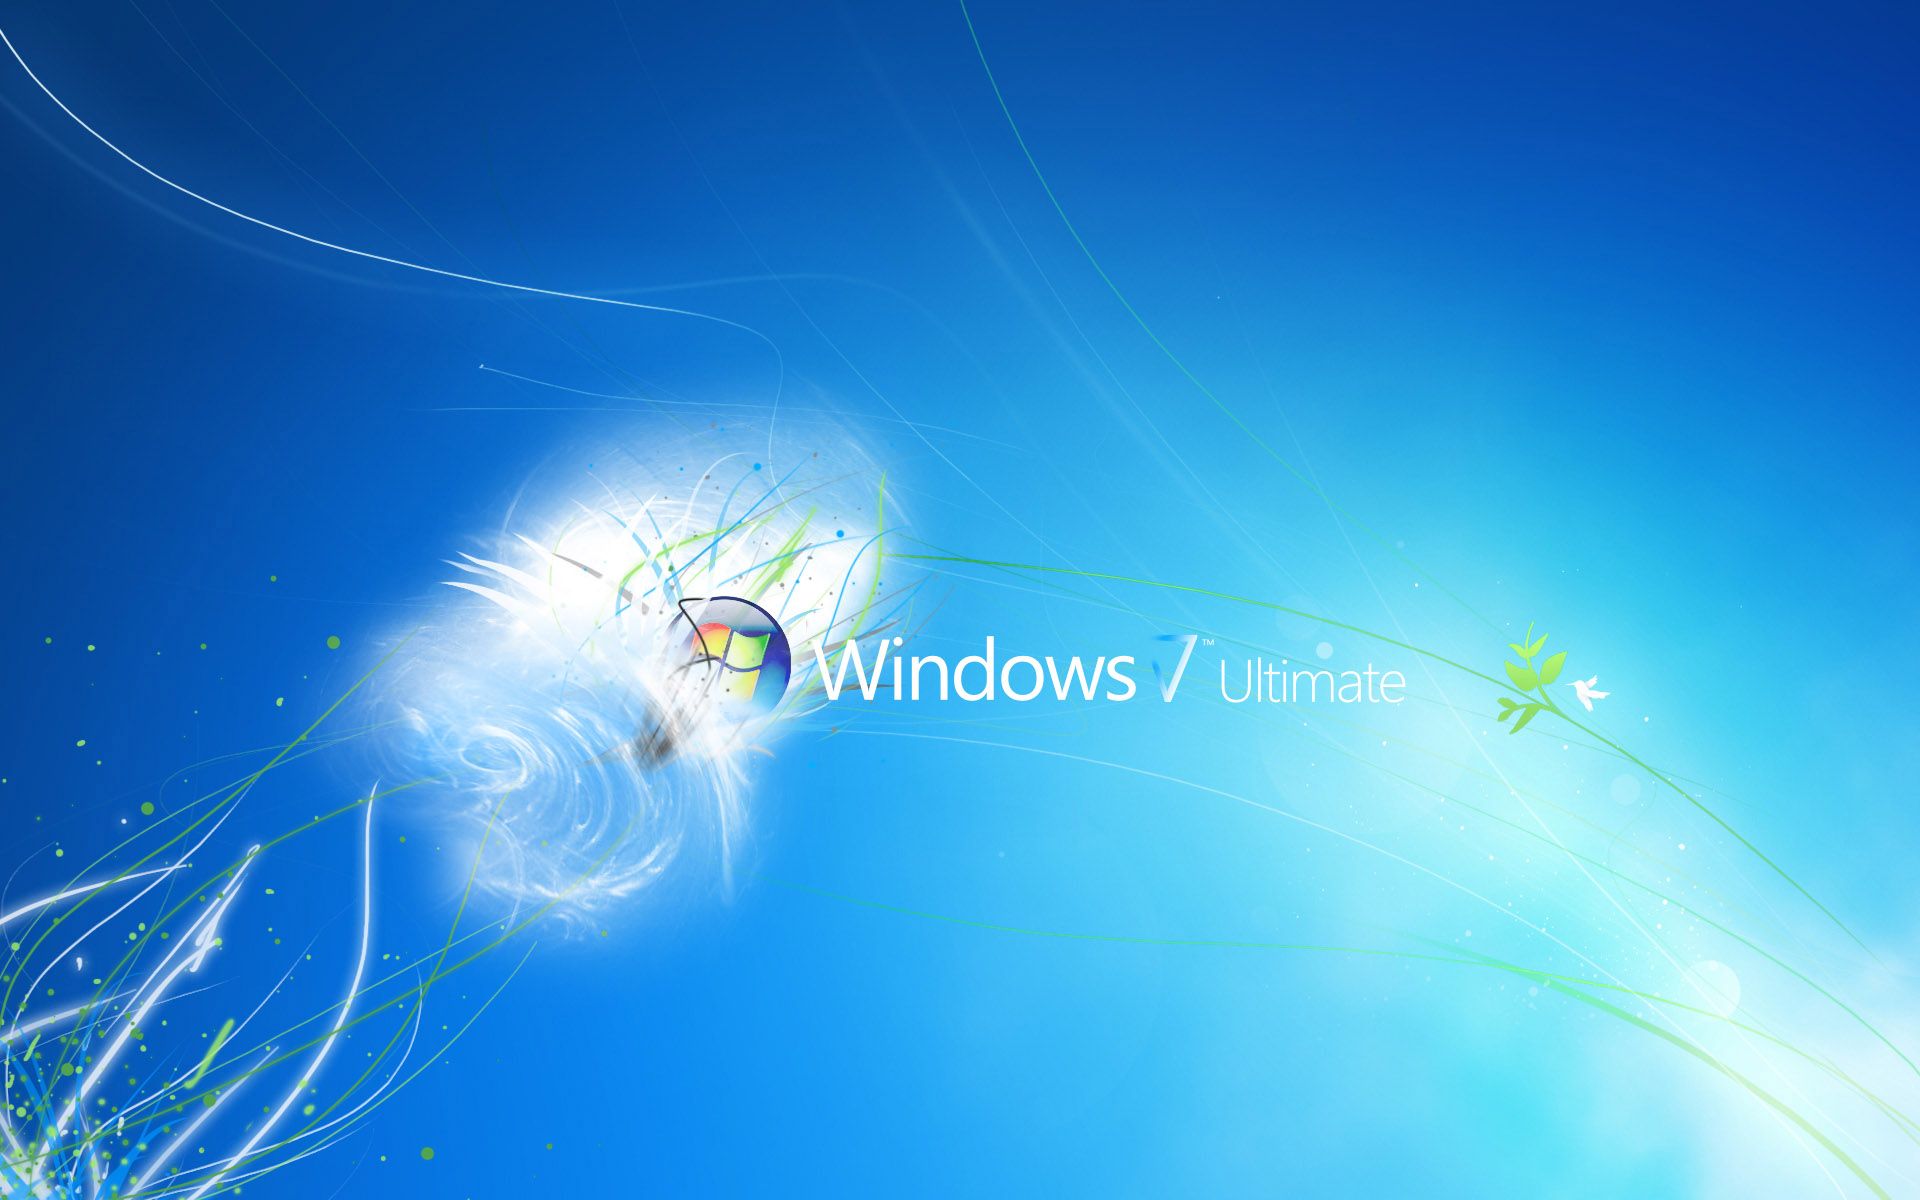 Glow Win 7 Starter OS Get Latest Backgrounds